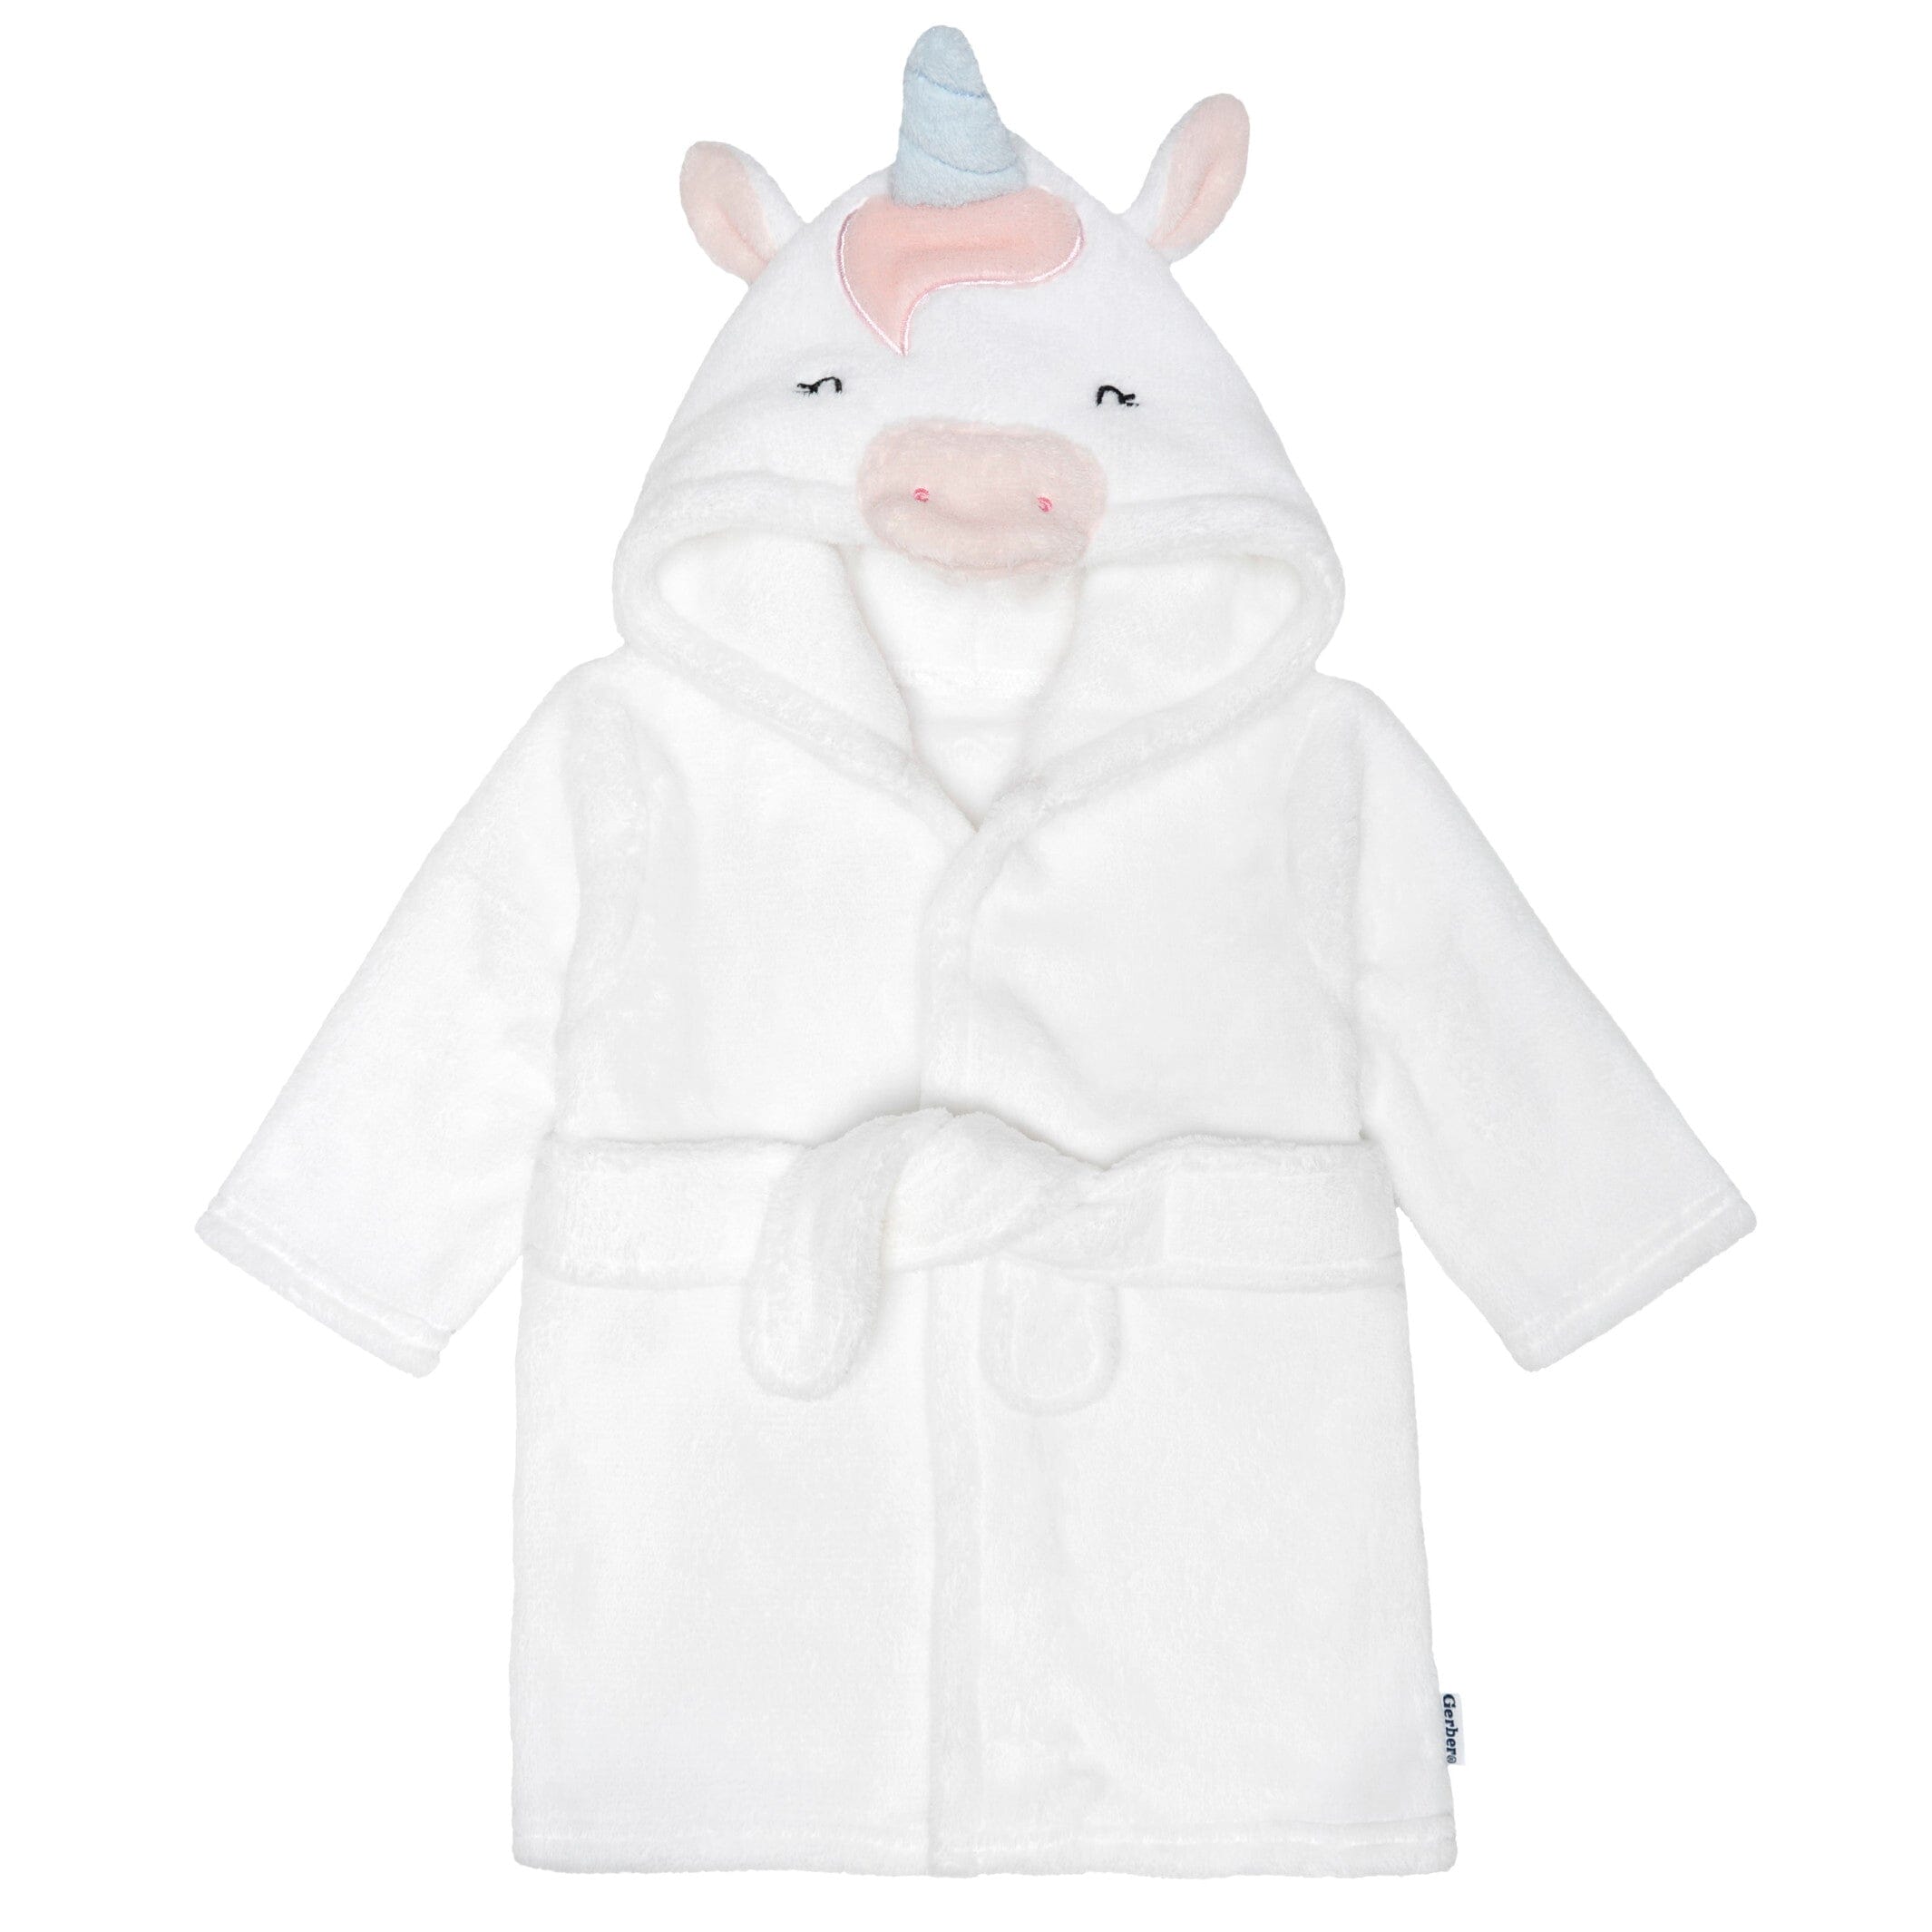 Infant Girl Bath Robes Wash Waddle Princess Crown Hooded Robe Girls Bathrobe  Towel Terry 2-3 Year Ultra Absorbent (White Princess, M) : Amazon.in: Baby  Products